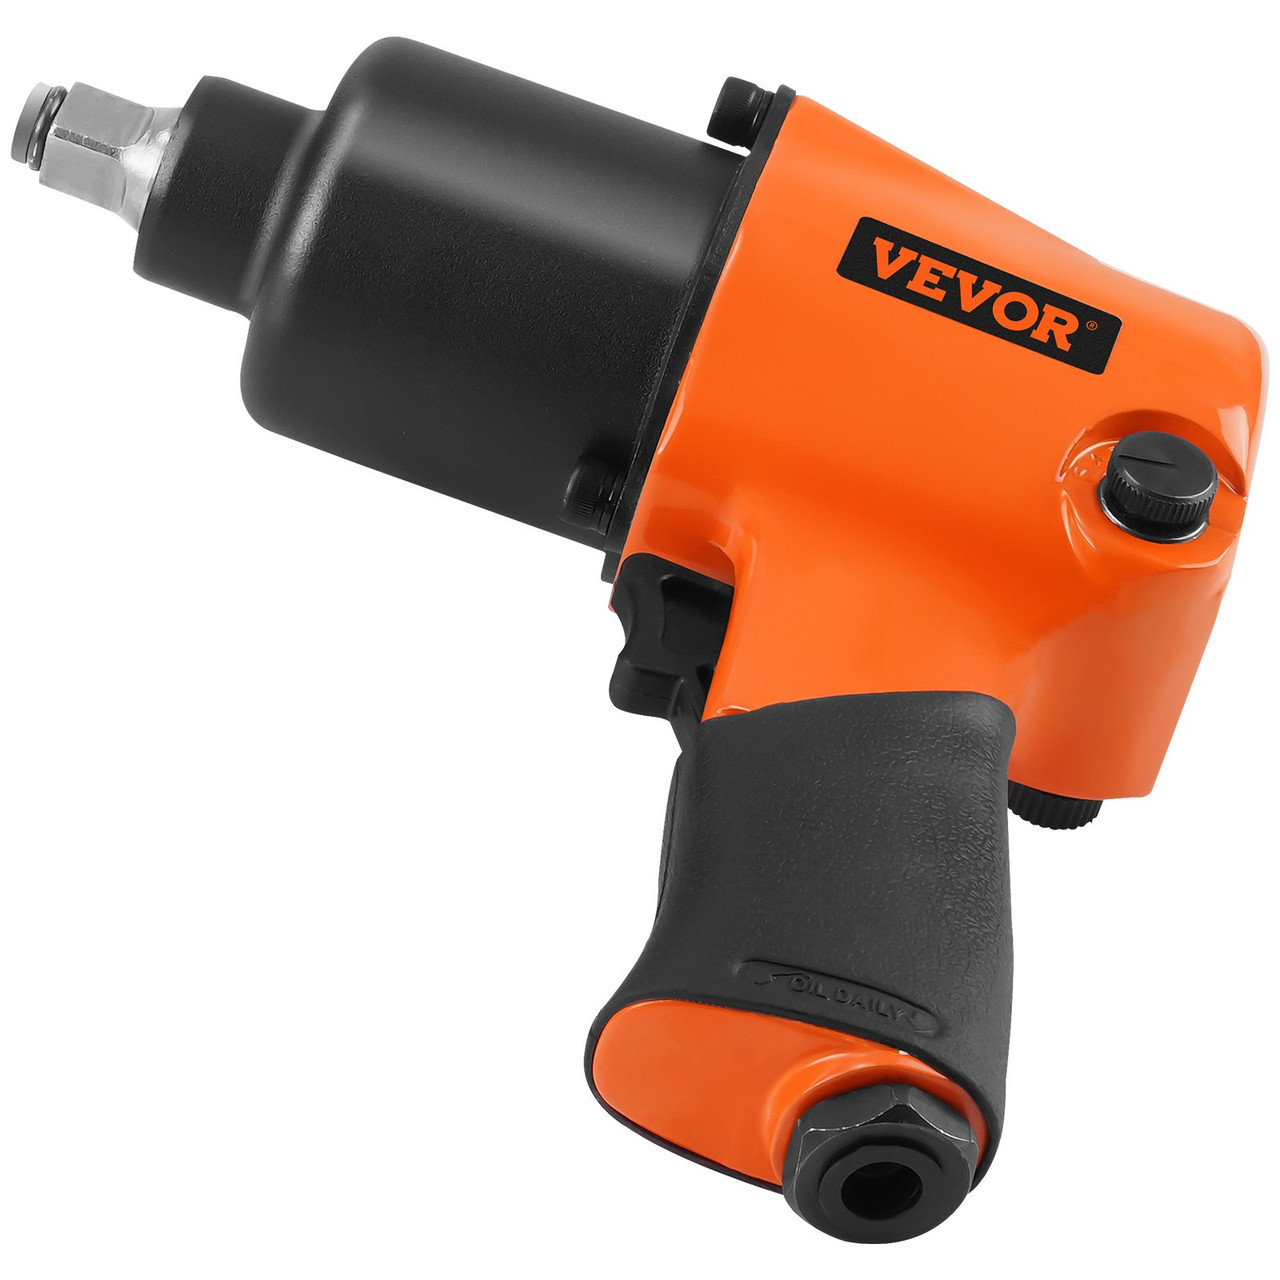 Air Impact Wrench, 1/2" Drive Air Impact Gun Up to 880ft-lbs Nut-busting Torque, 7500RPM Lightweight Pneumatic Tool for Auto Repairs and Maintenance